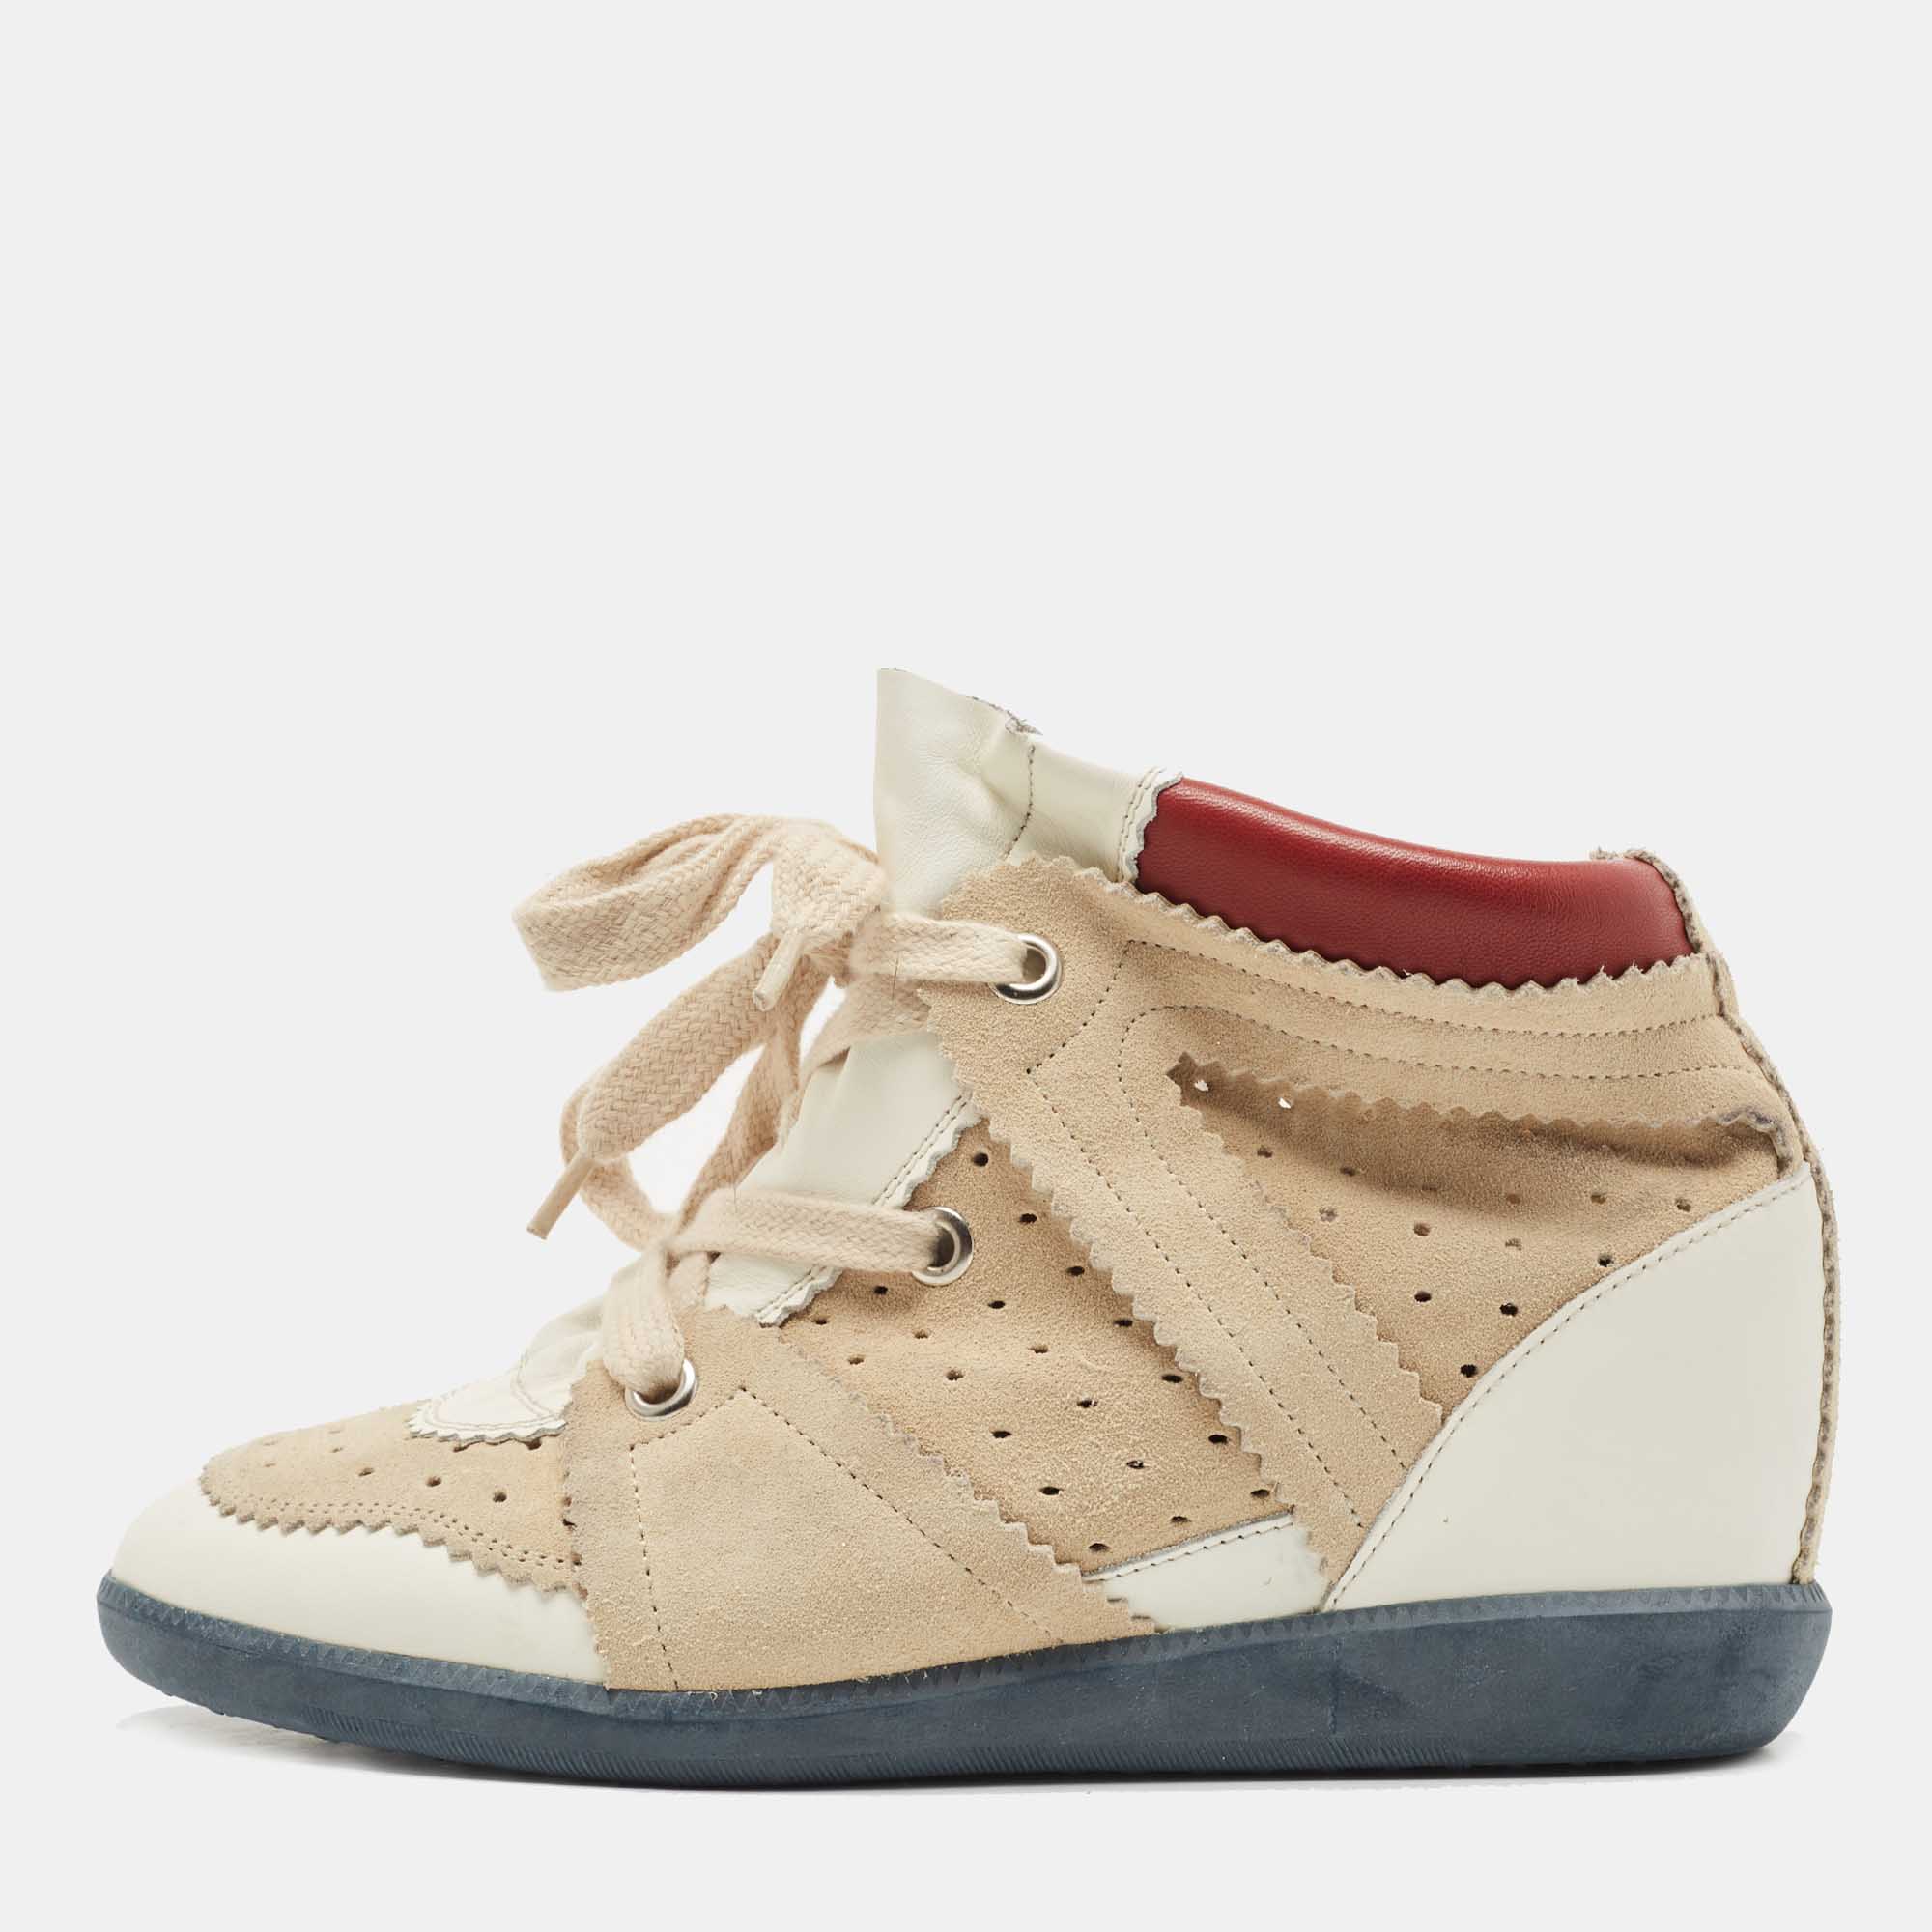 Isabel Marant Tricolor Leather And Suede Bobby Wedge Sneakers Size 40